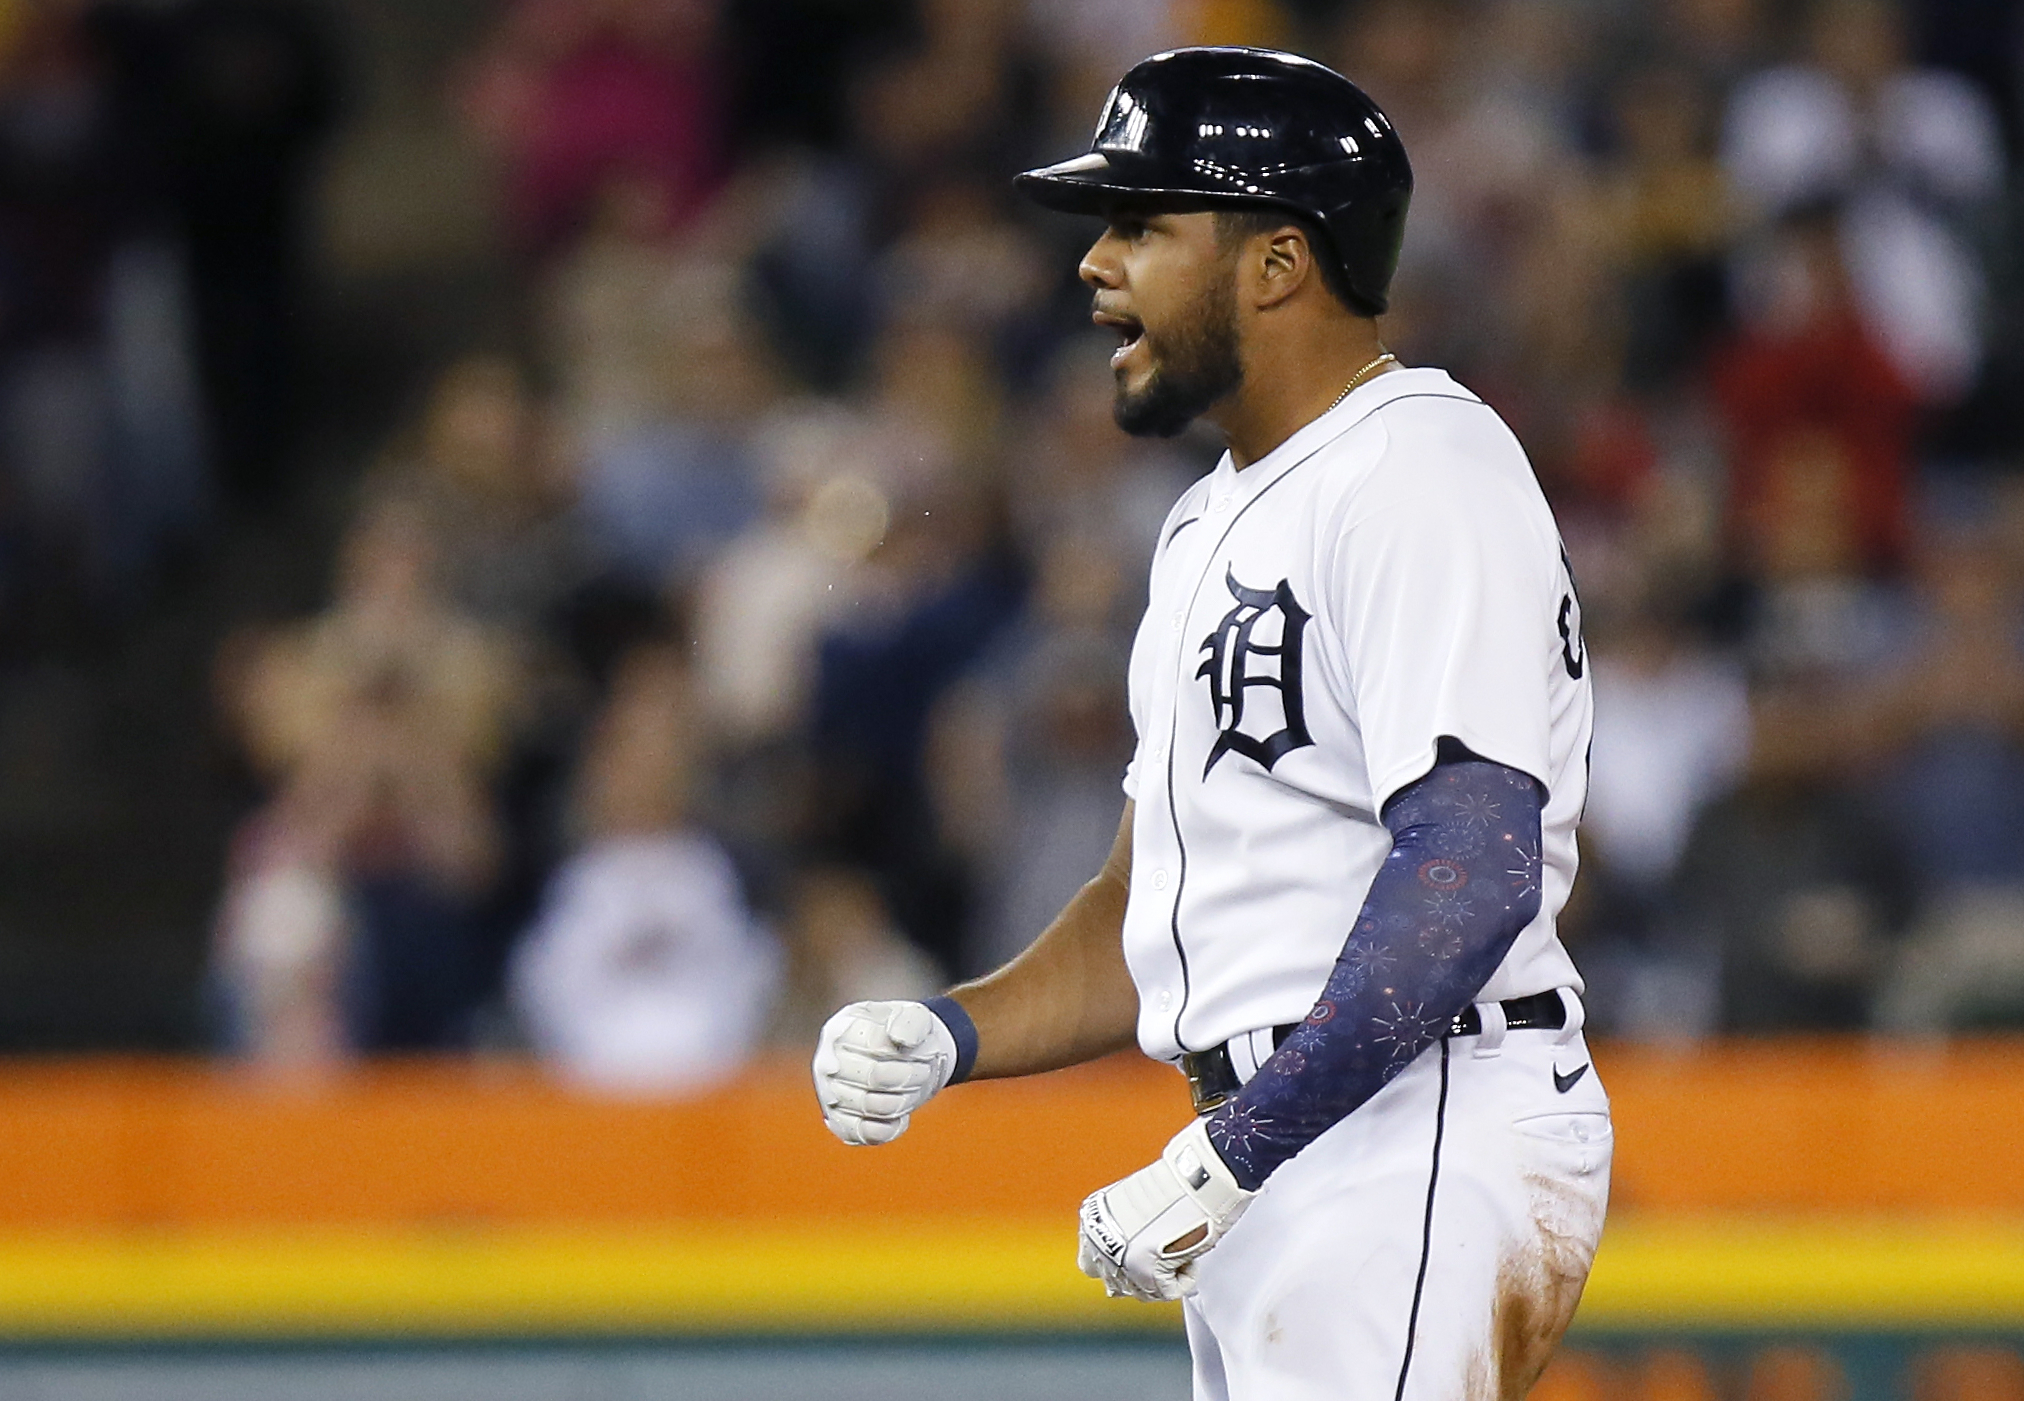 watch detroit tigers without cable